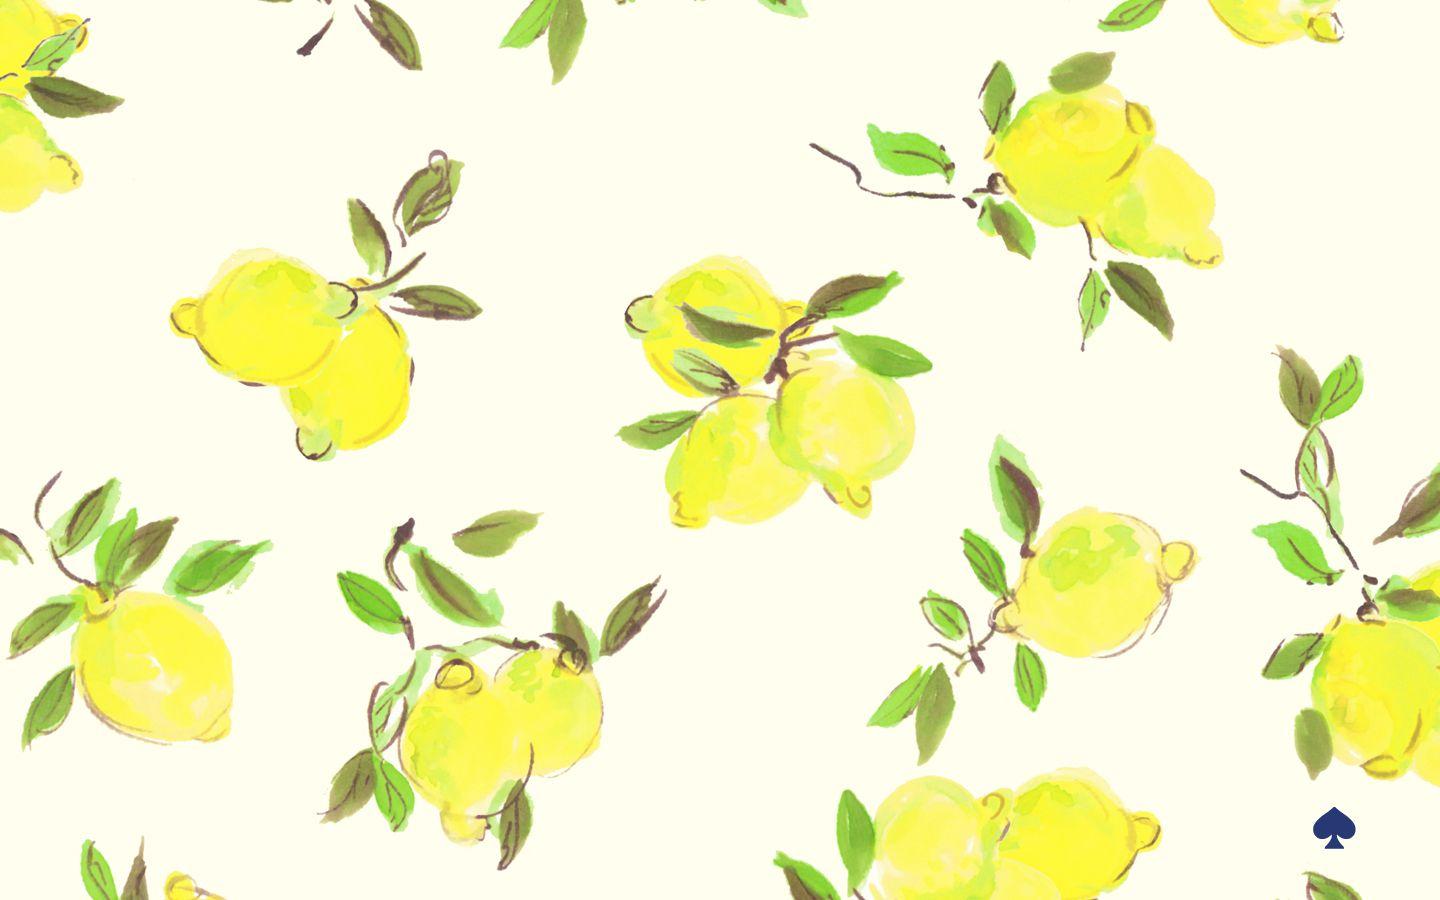 decoratecolorfully when life gives you lemons, make them your tech